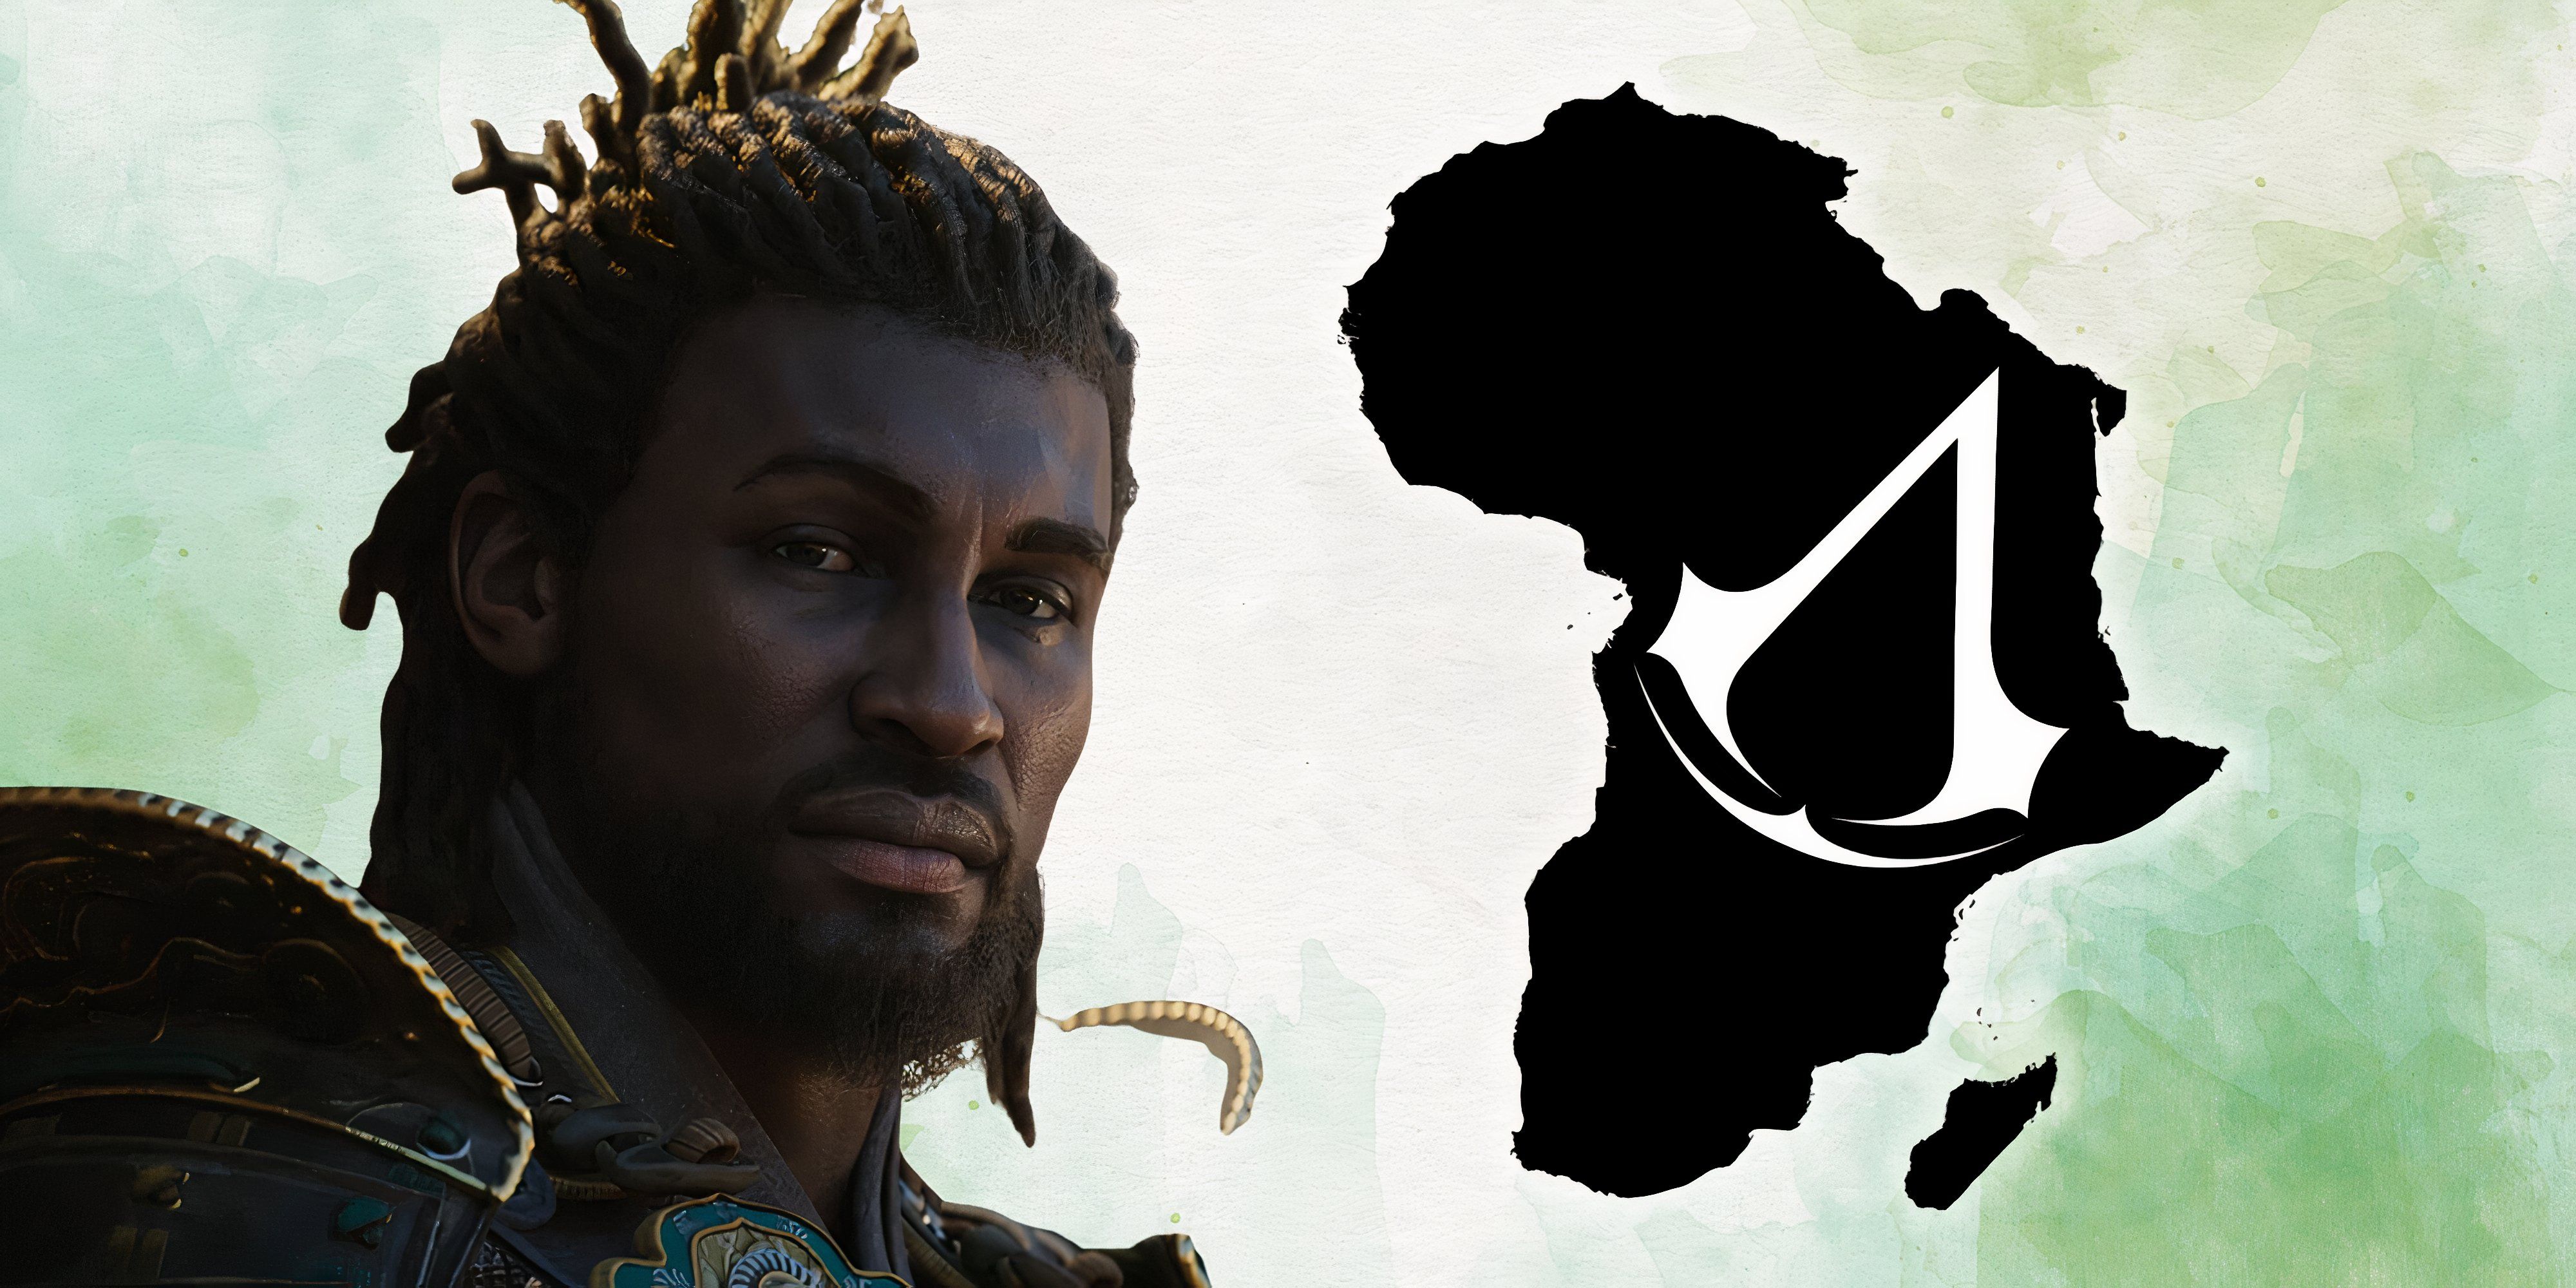 Yasuke from Assassin's Creed next to an outline of Africa